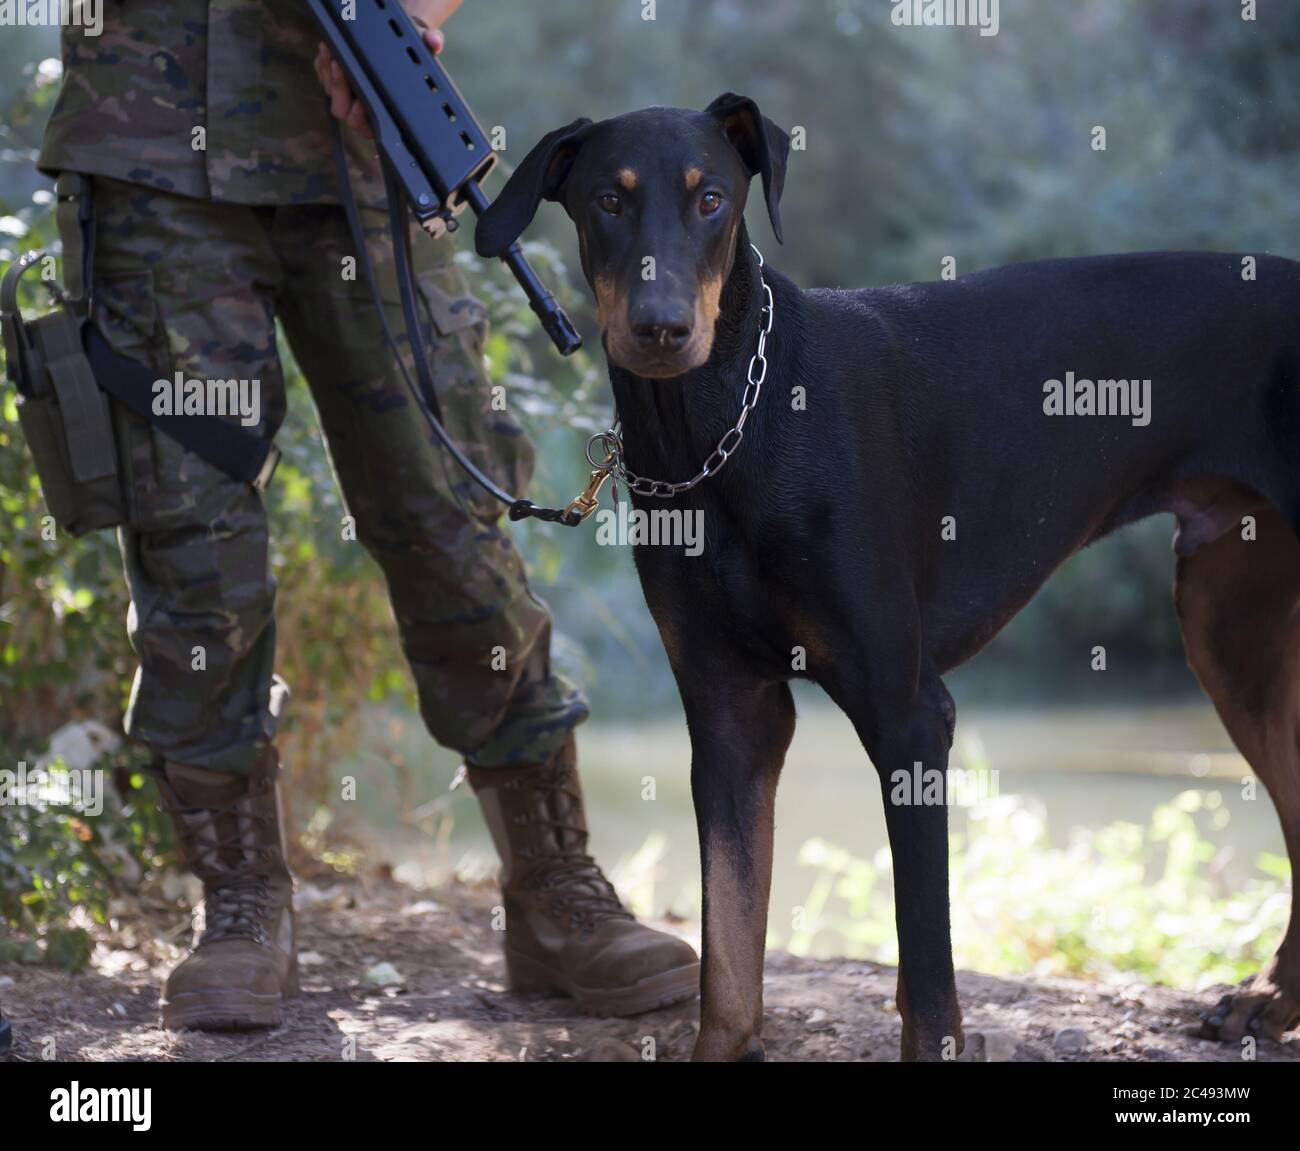 Closeup shot of a Doberman standing on the ground with a soldier under the sunlight at daytime Stock Photo